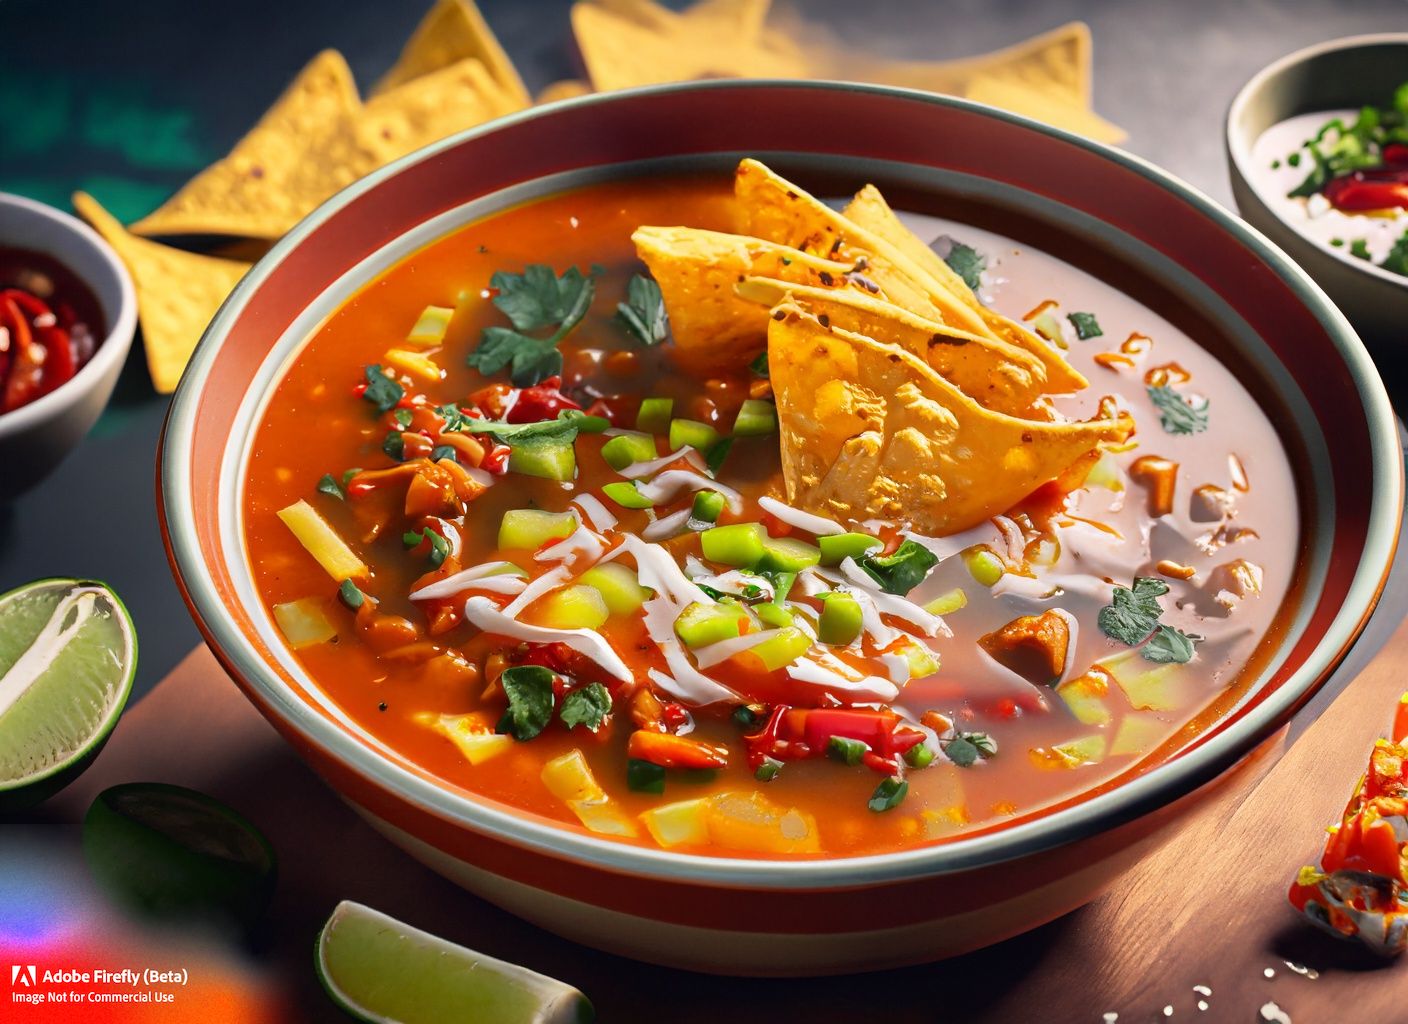 A steaming bowl of traditional Mexican Tortilla Soup, brimming with crispy tortilla strips and a medley of vibrant garnishes.